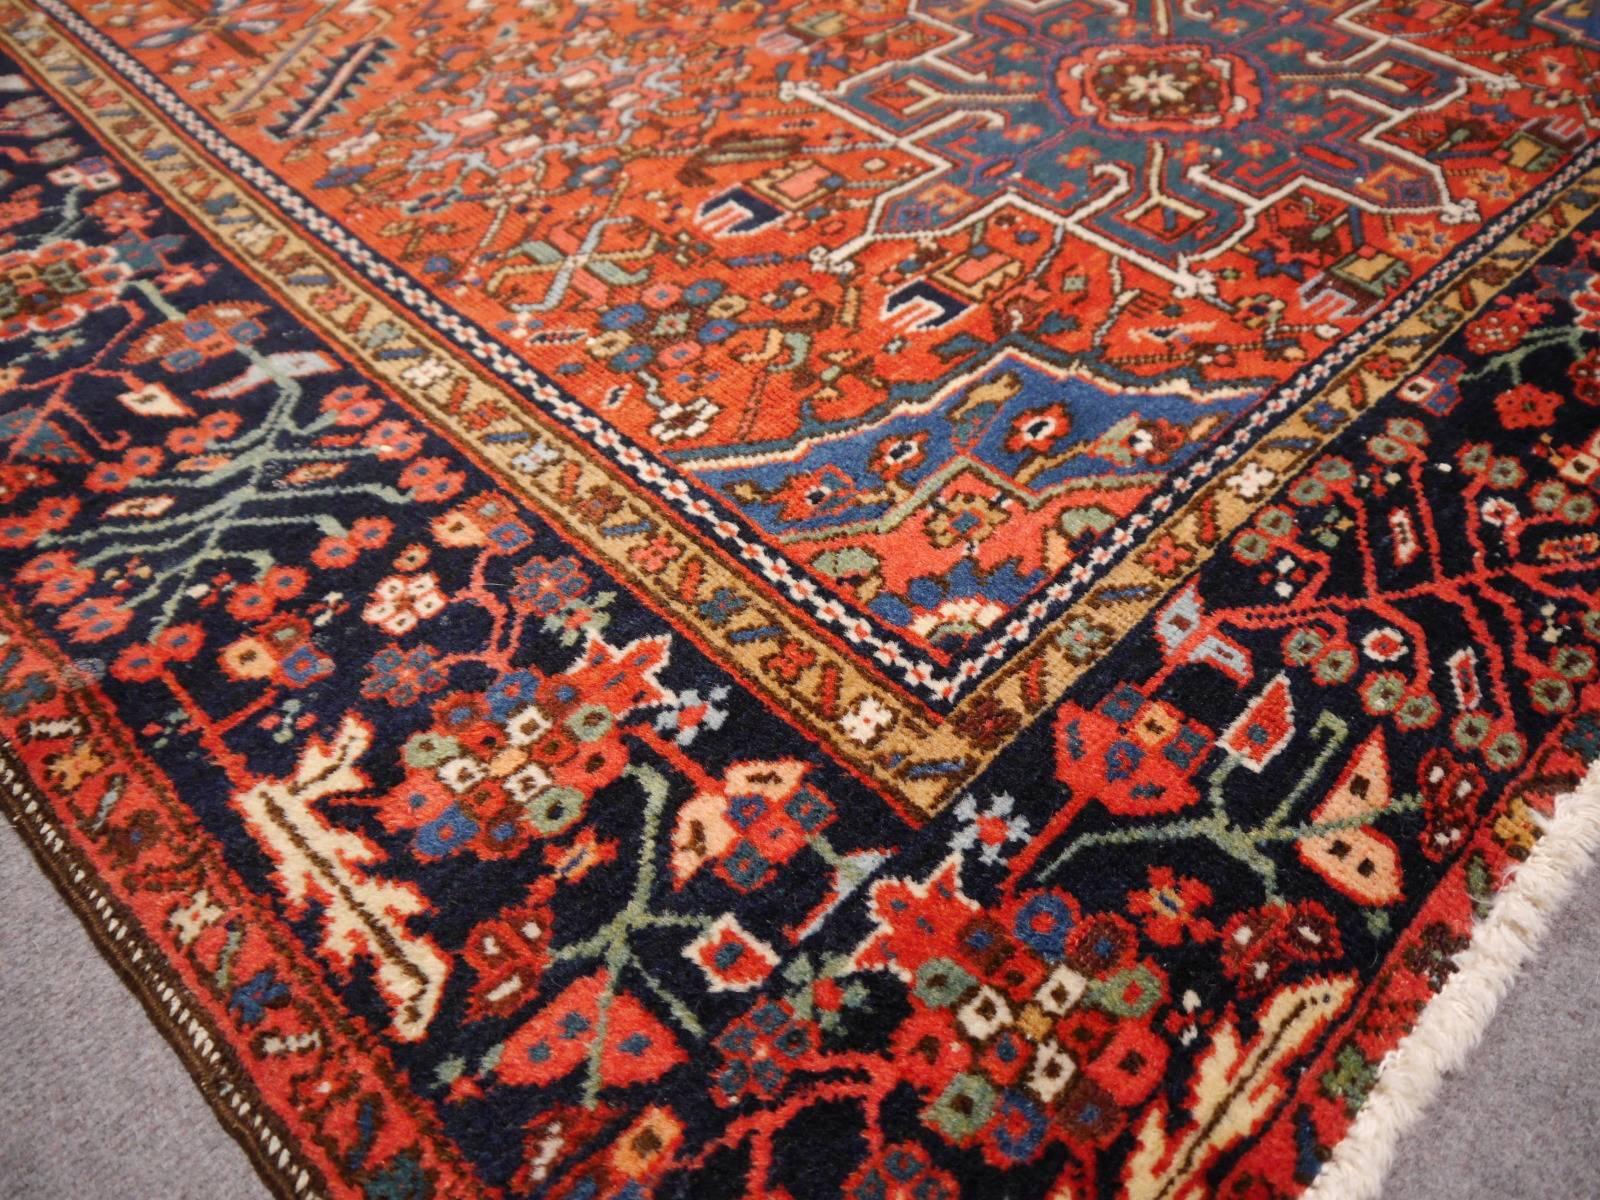 Beautiful semi antique Azeri rug from the Caucasus Area west of the caspian sea. Good condition with low pile.